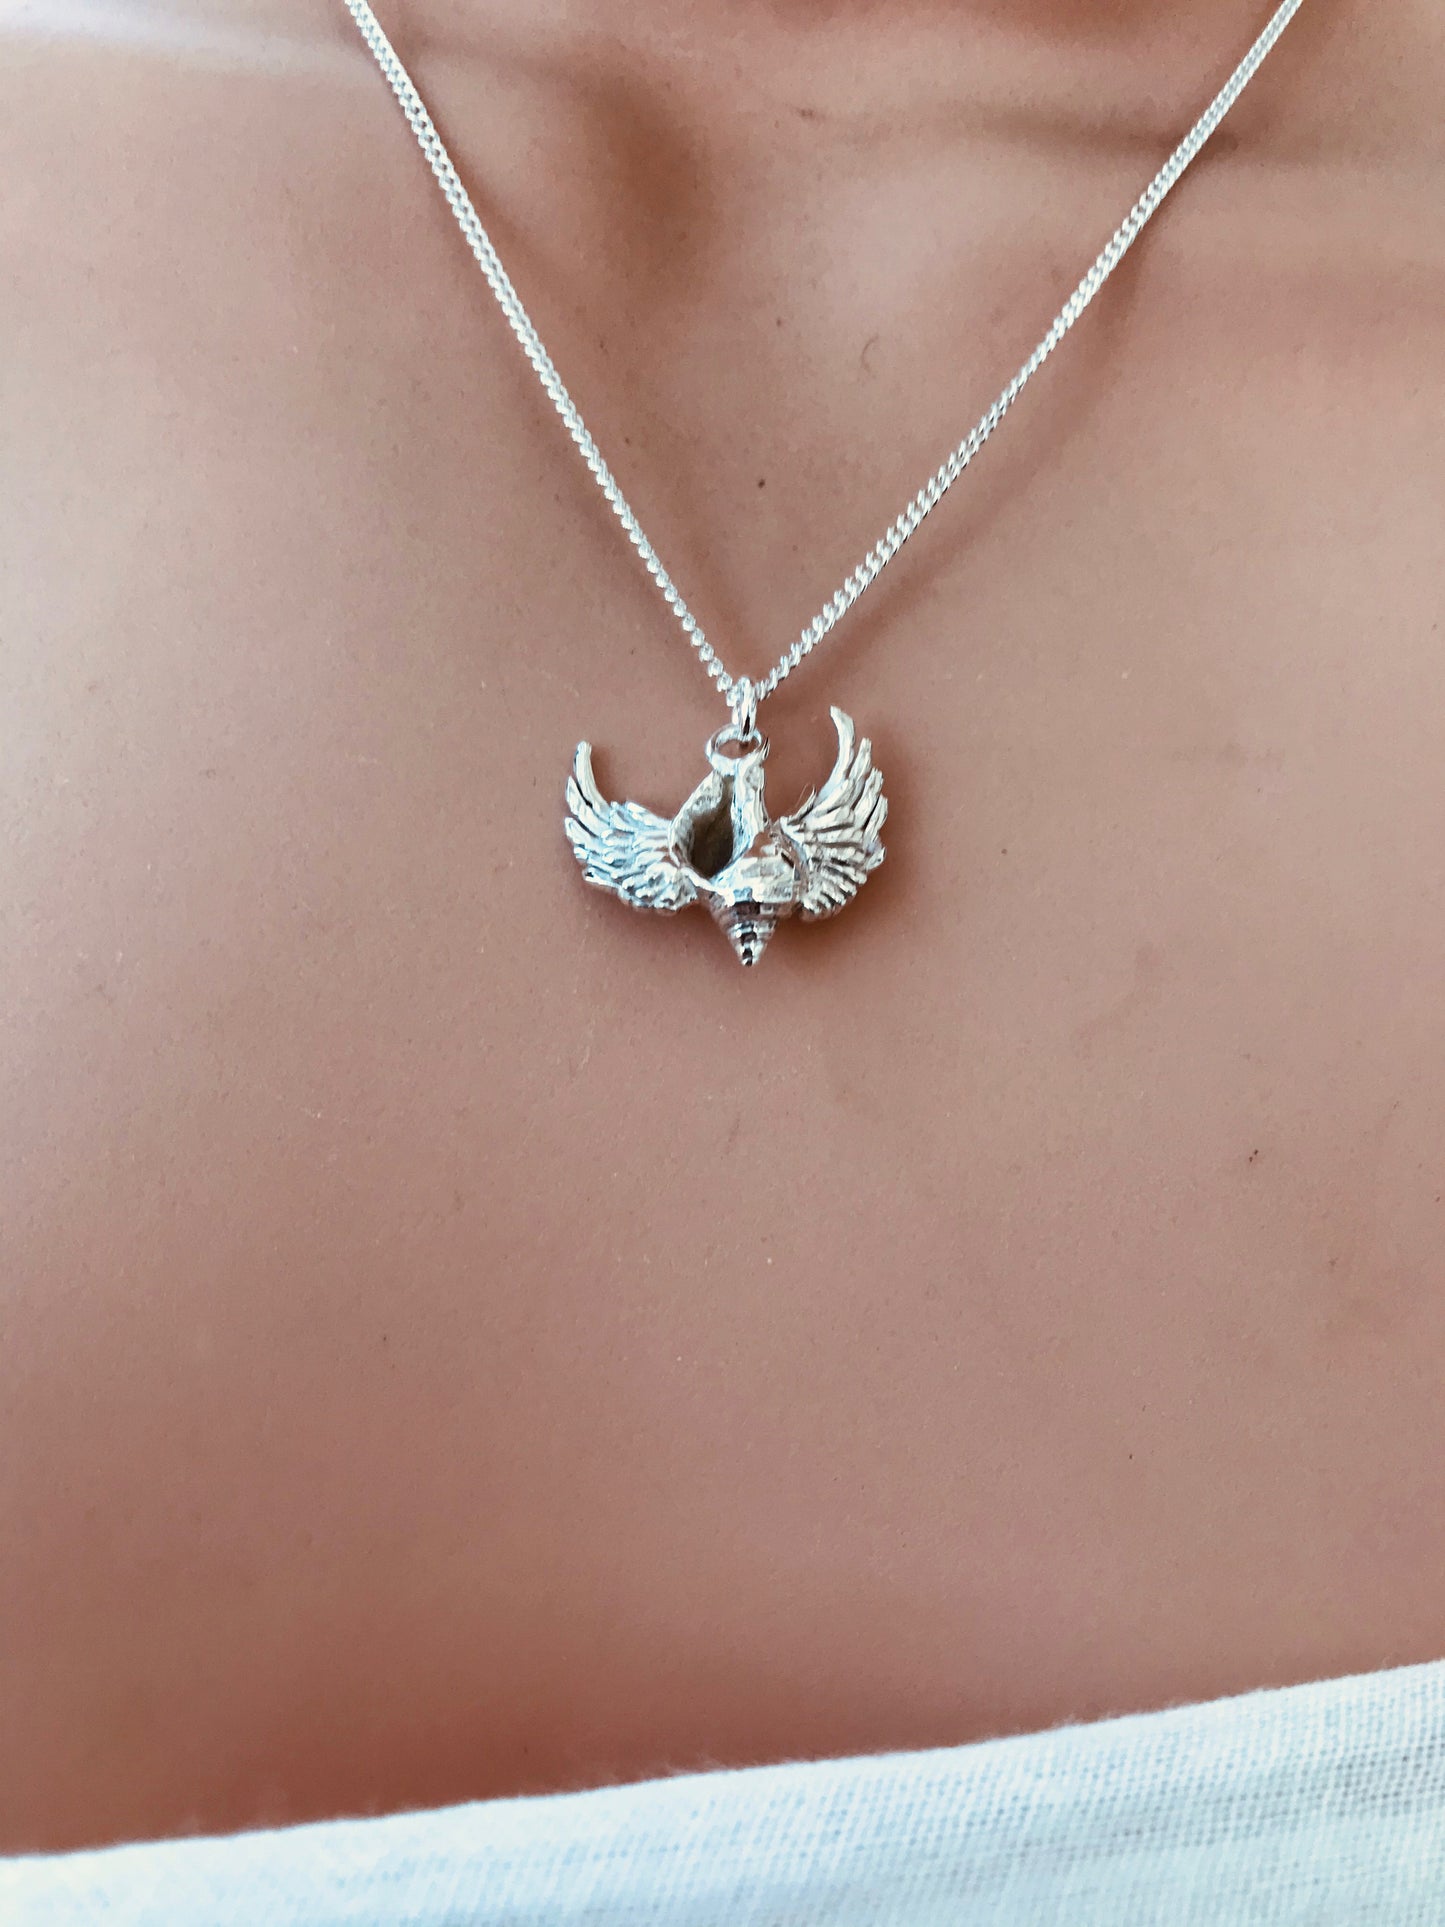 Whelk shell with wings necklace